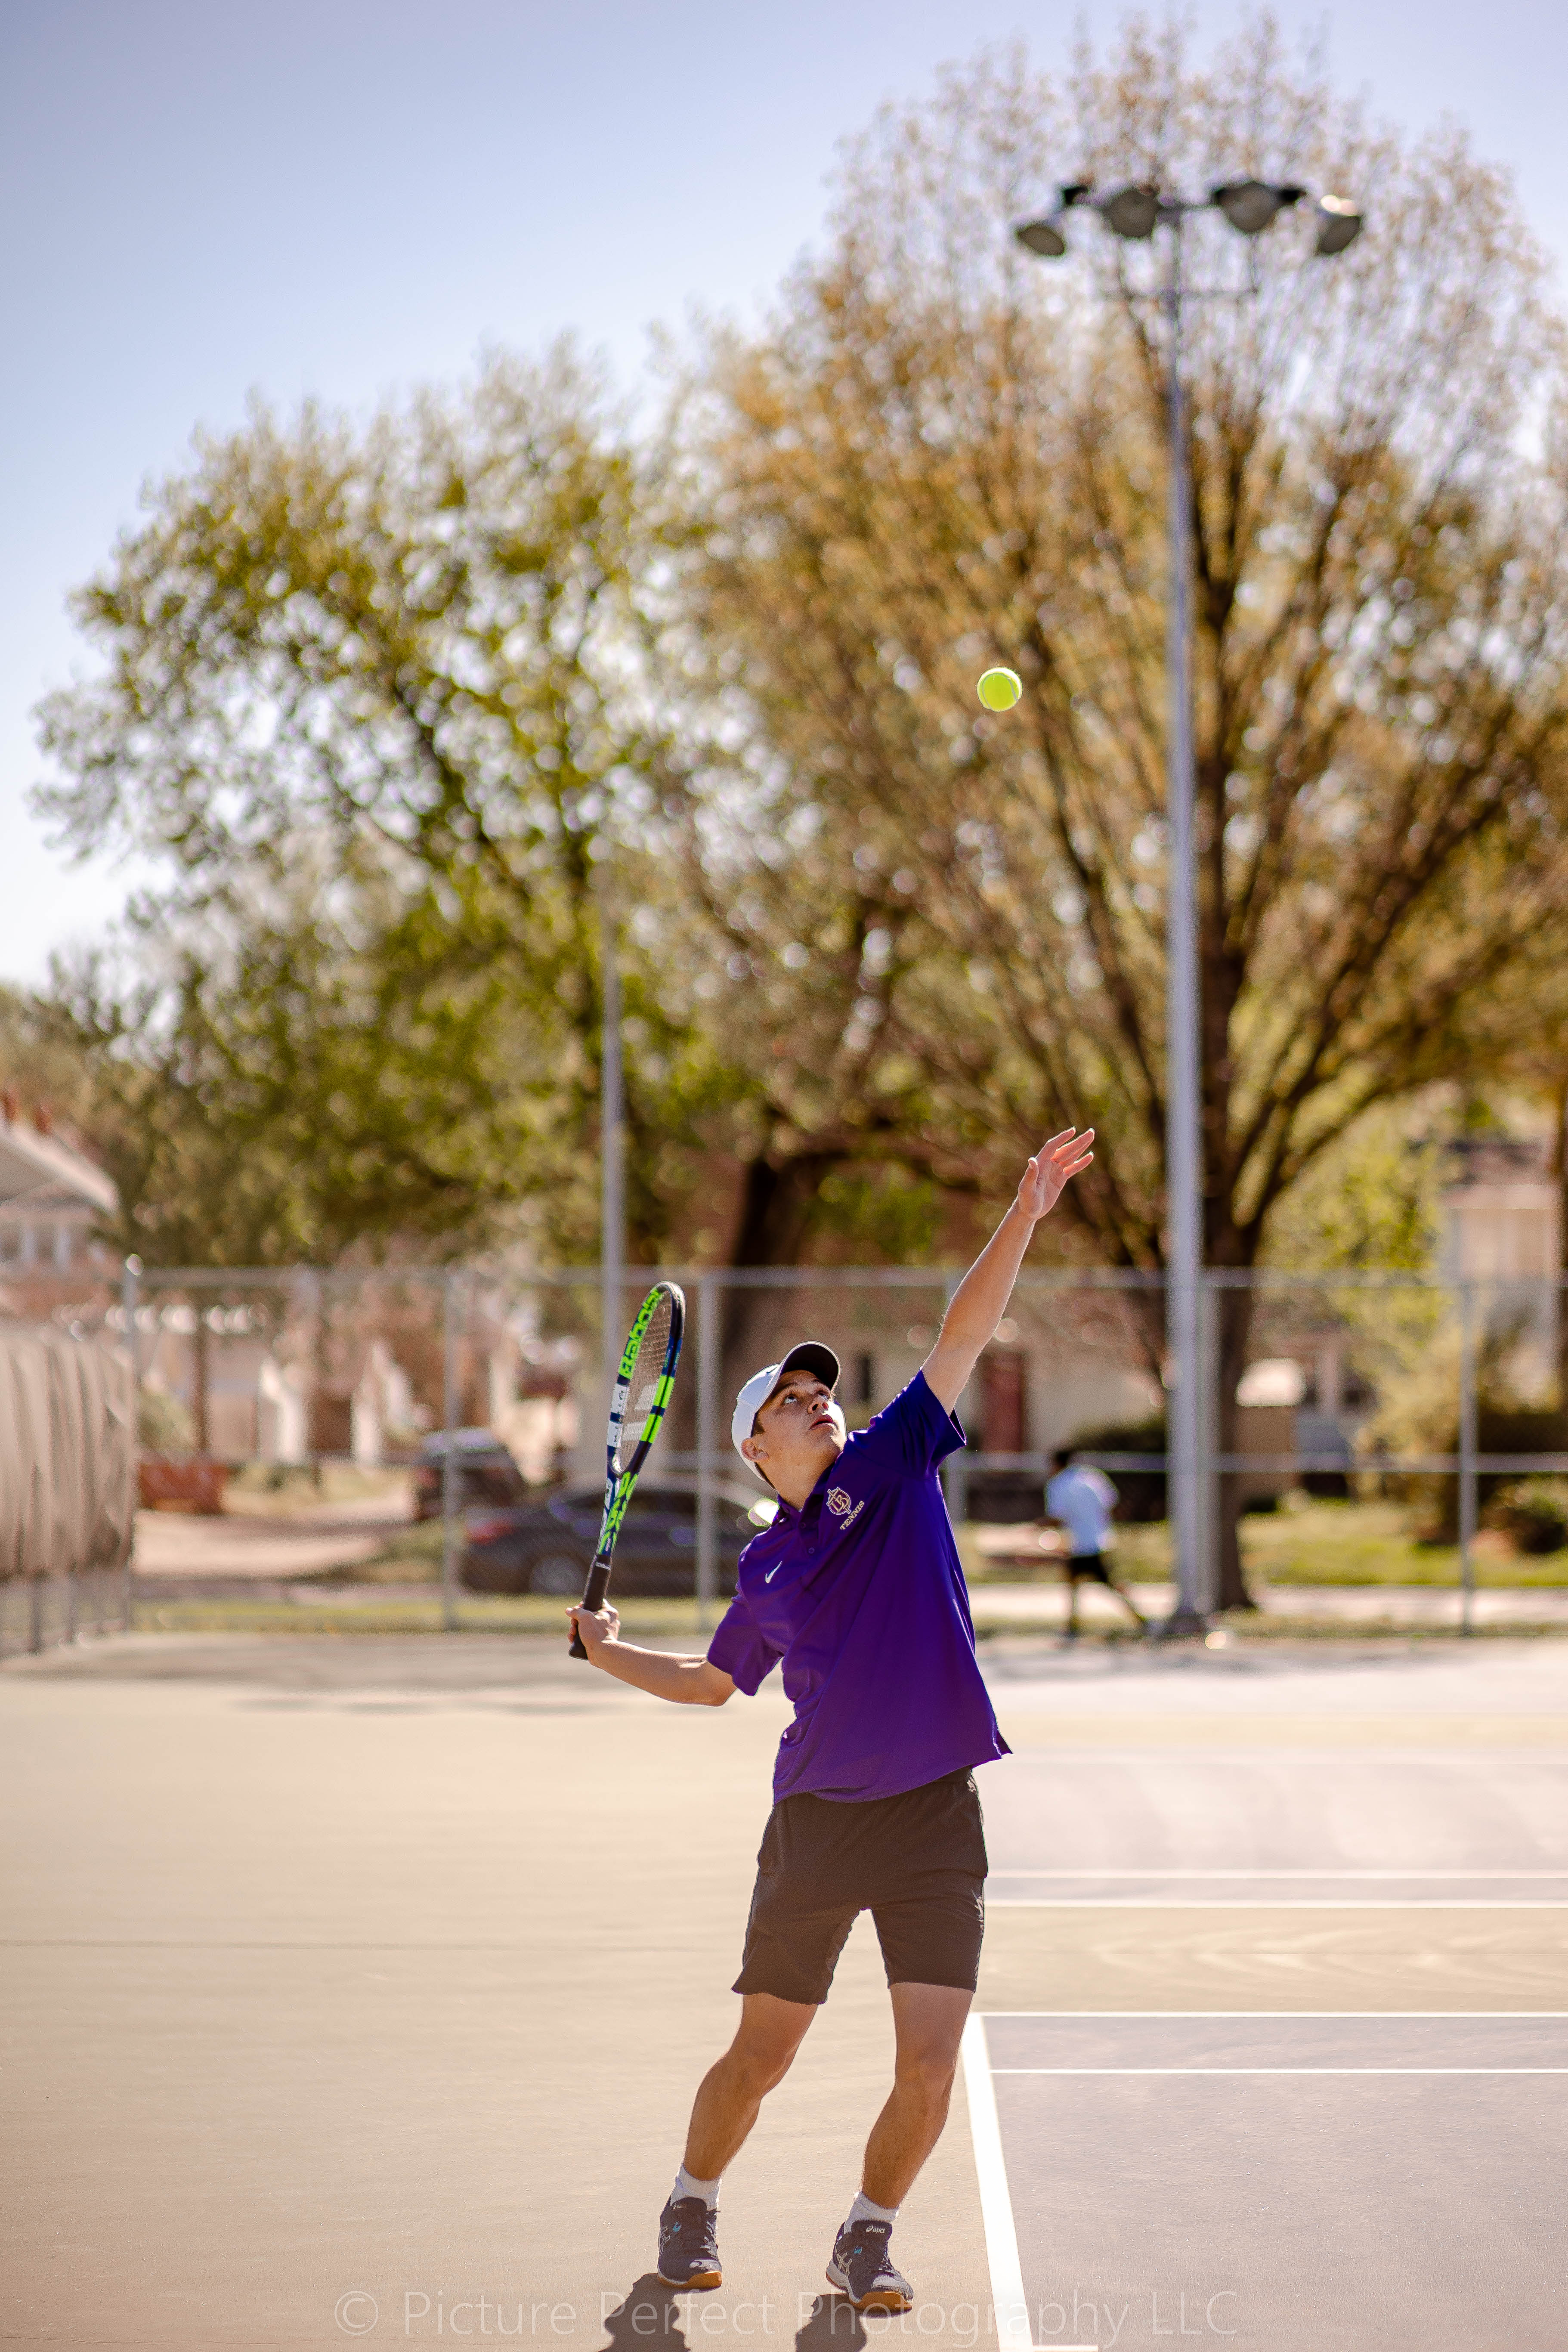 Picture of boy serving tennis ball